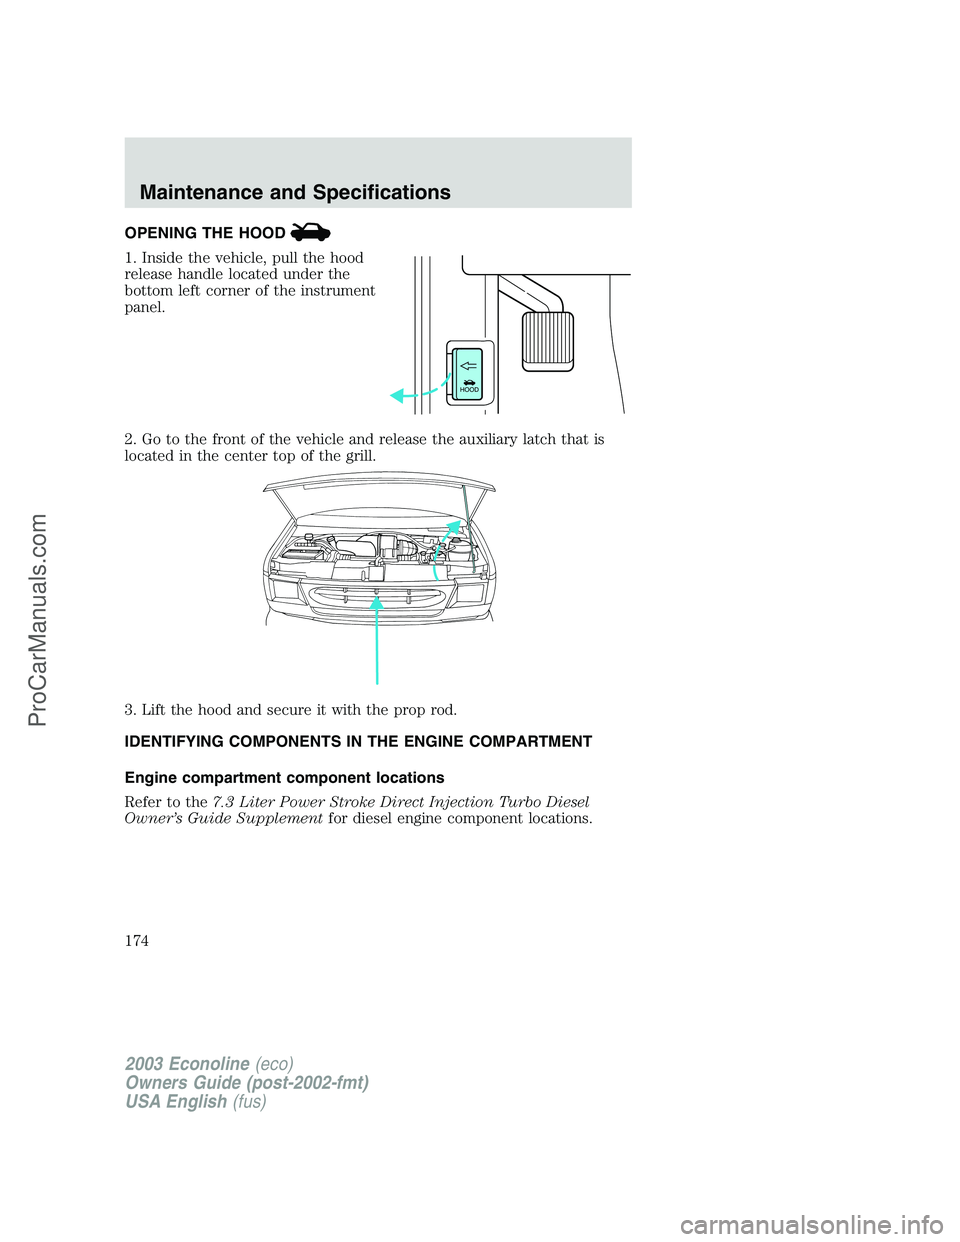 FORD E-150 2003  Owners Manual OPENING THE HOOD
1. Inside the vehicle, pull the hood
release handle located under the
bottom left corner of the instrument
panel.
2. Go to the front of the vehicle and release the auxiliary latch tha